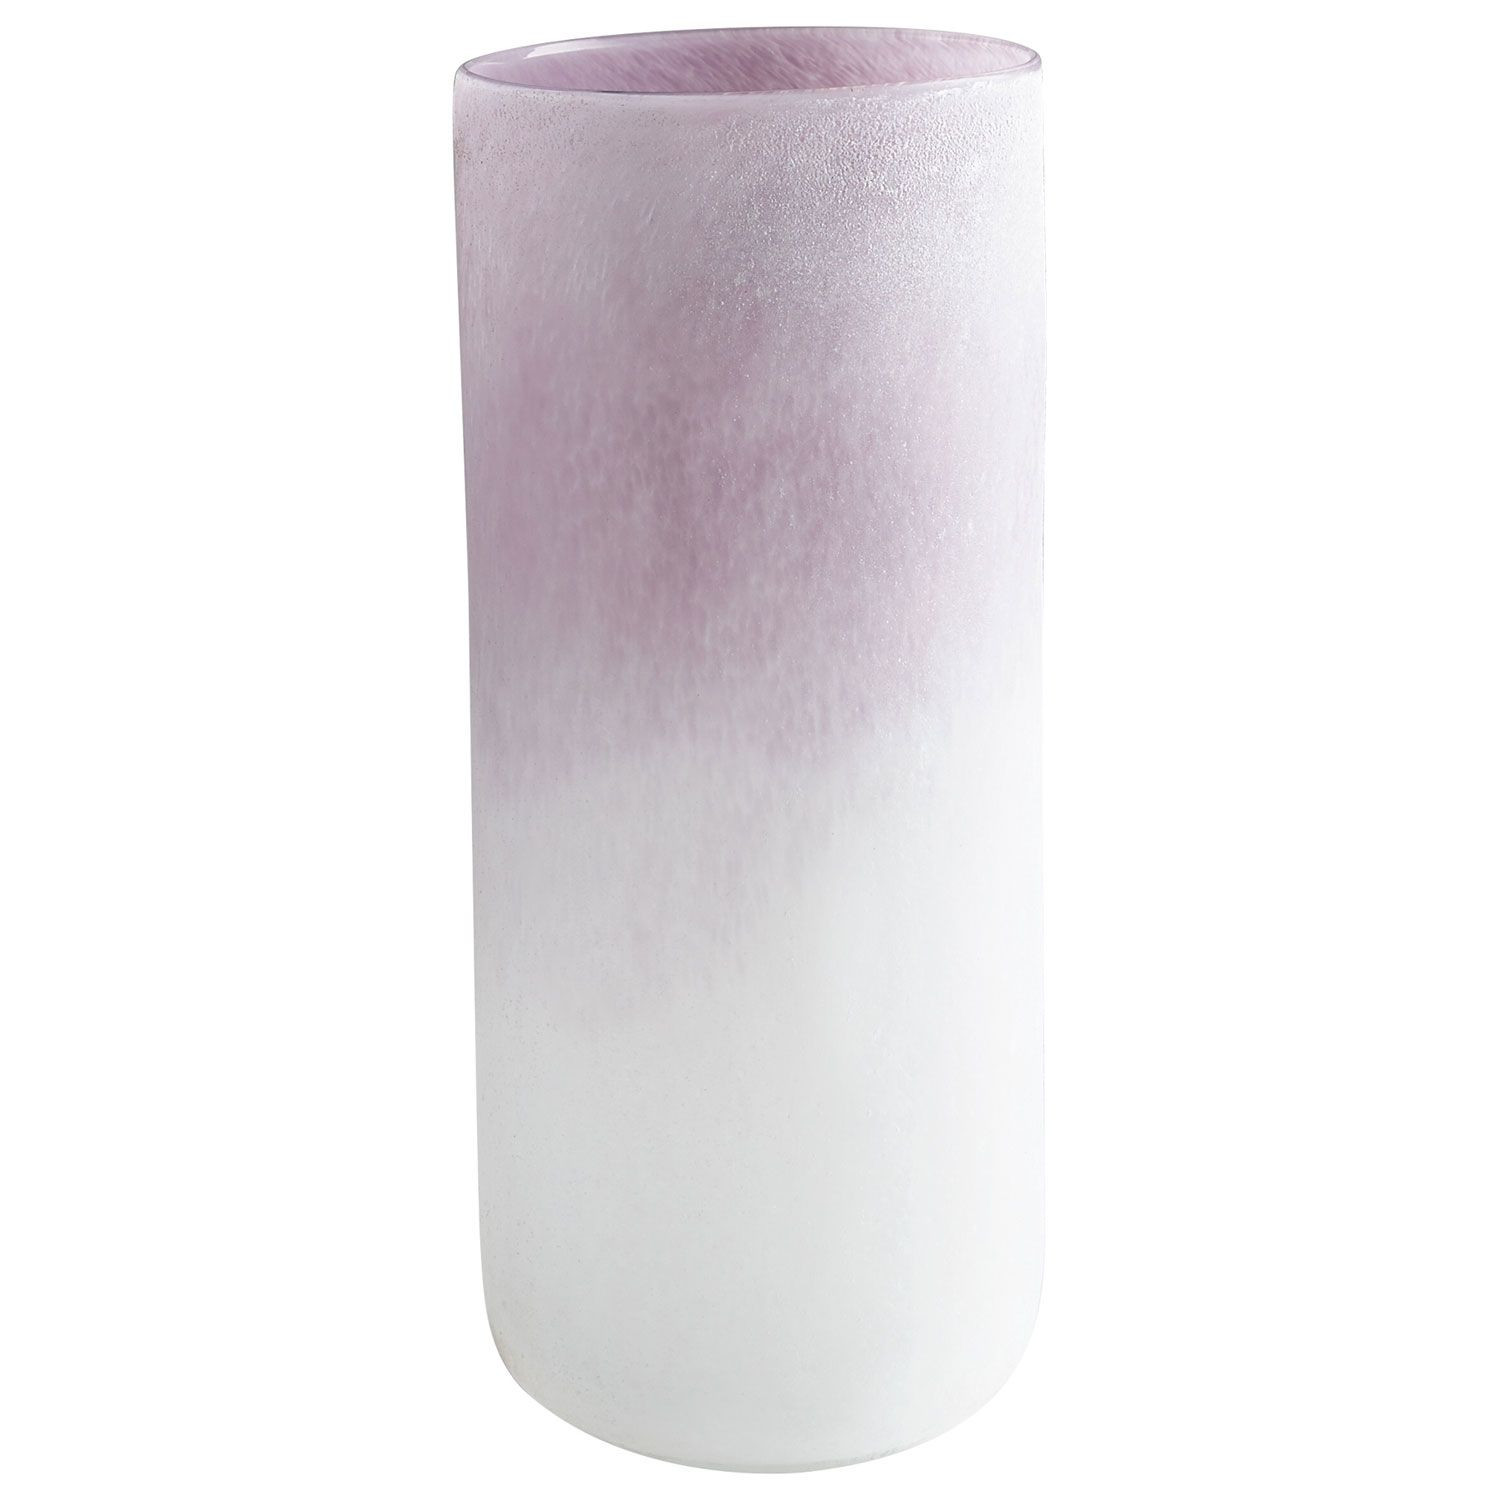 18 Famous Large Purple Floor Vase 2024 free download large purple floor vase of the tundra large vase displays bouquets with a hint of modern regarding the tundra large vase displays bouquets with a hint of modern romanticism an ombre style de